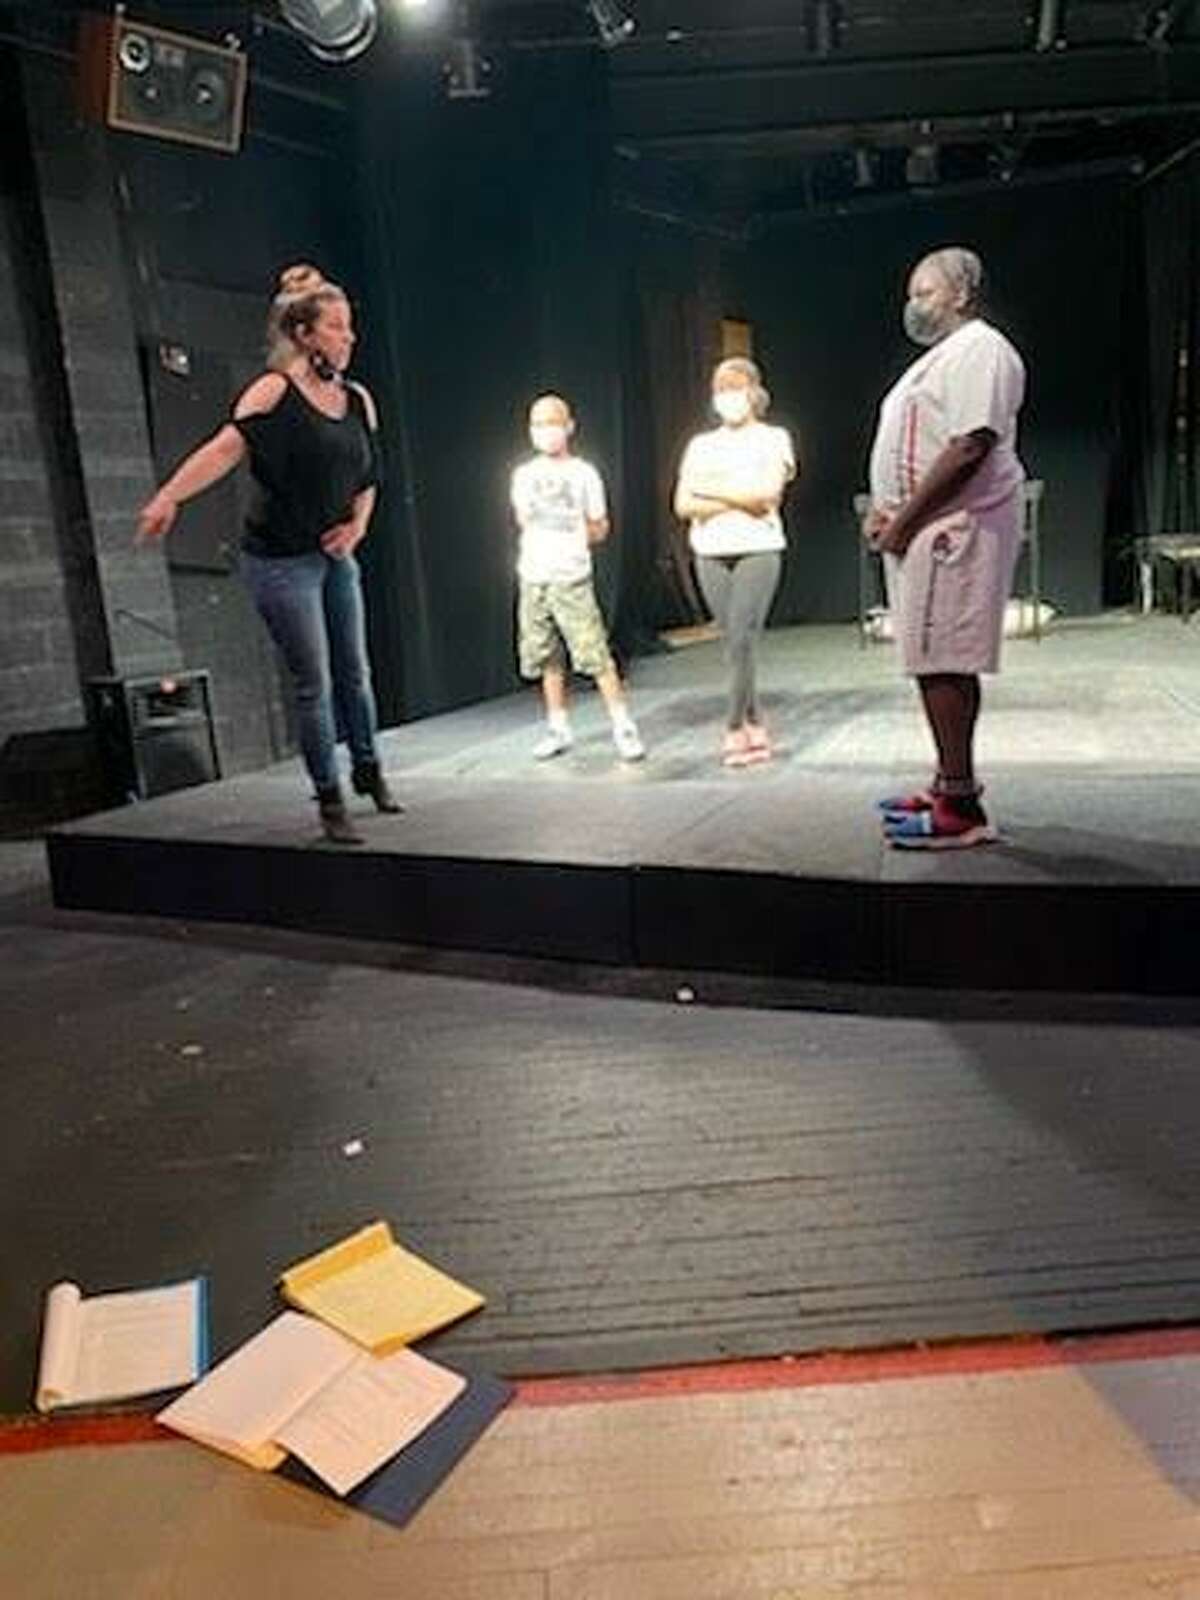 Young performers gathered by Ice the Beef and Elm City Shakespeare will perform Romeo & Juliet Saturday, asking residents to consider how this conflict, as well as those that prompt gun violence in the community, could be settled peacefully.